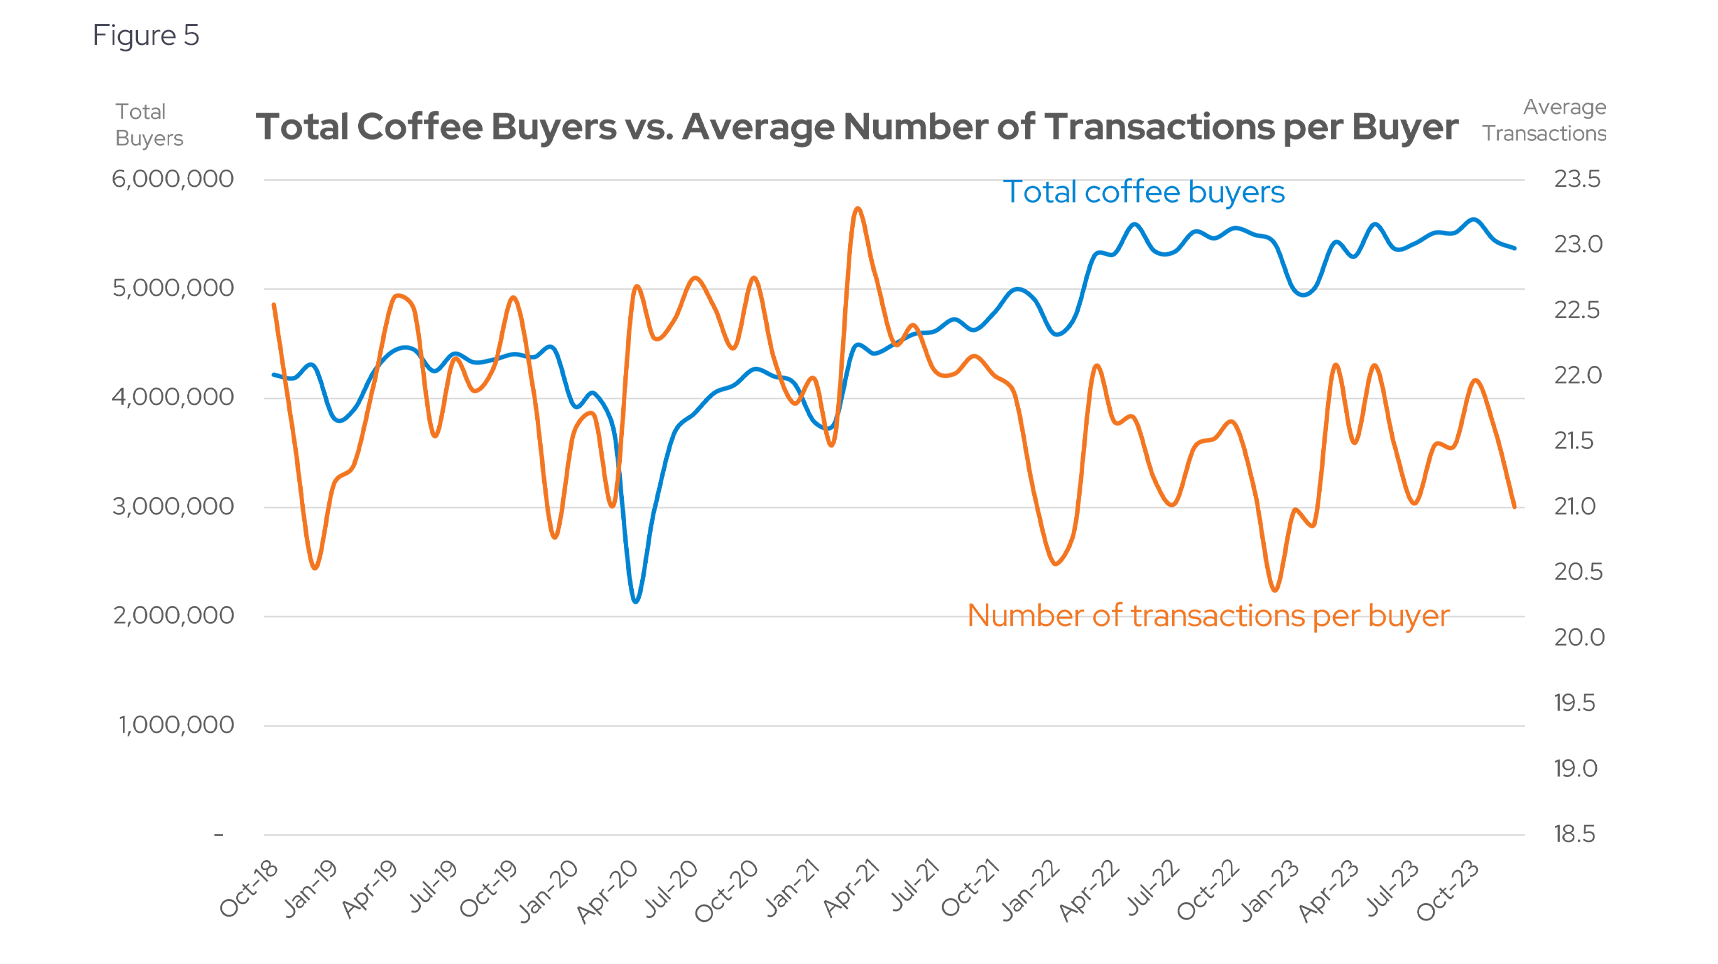 Total Coffee Buyers vs. Average Number of Transactions per Buyer